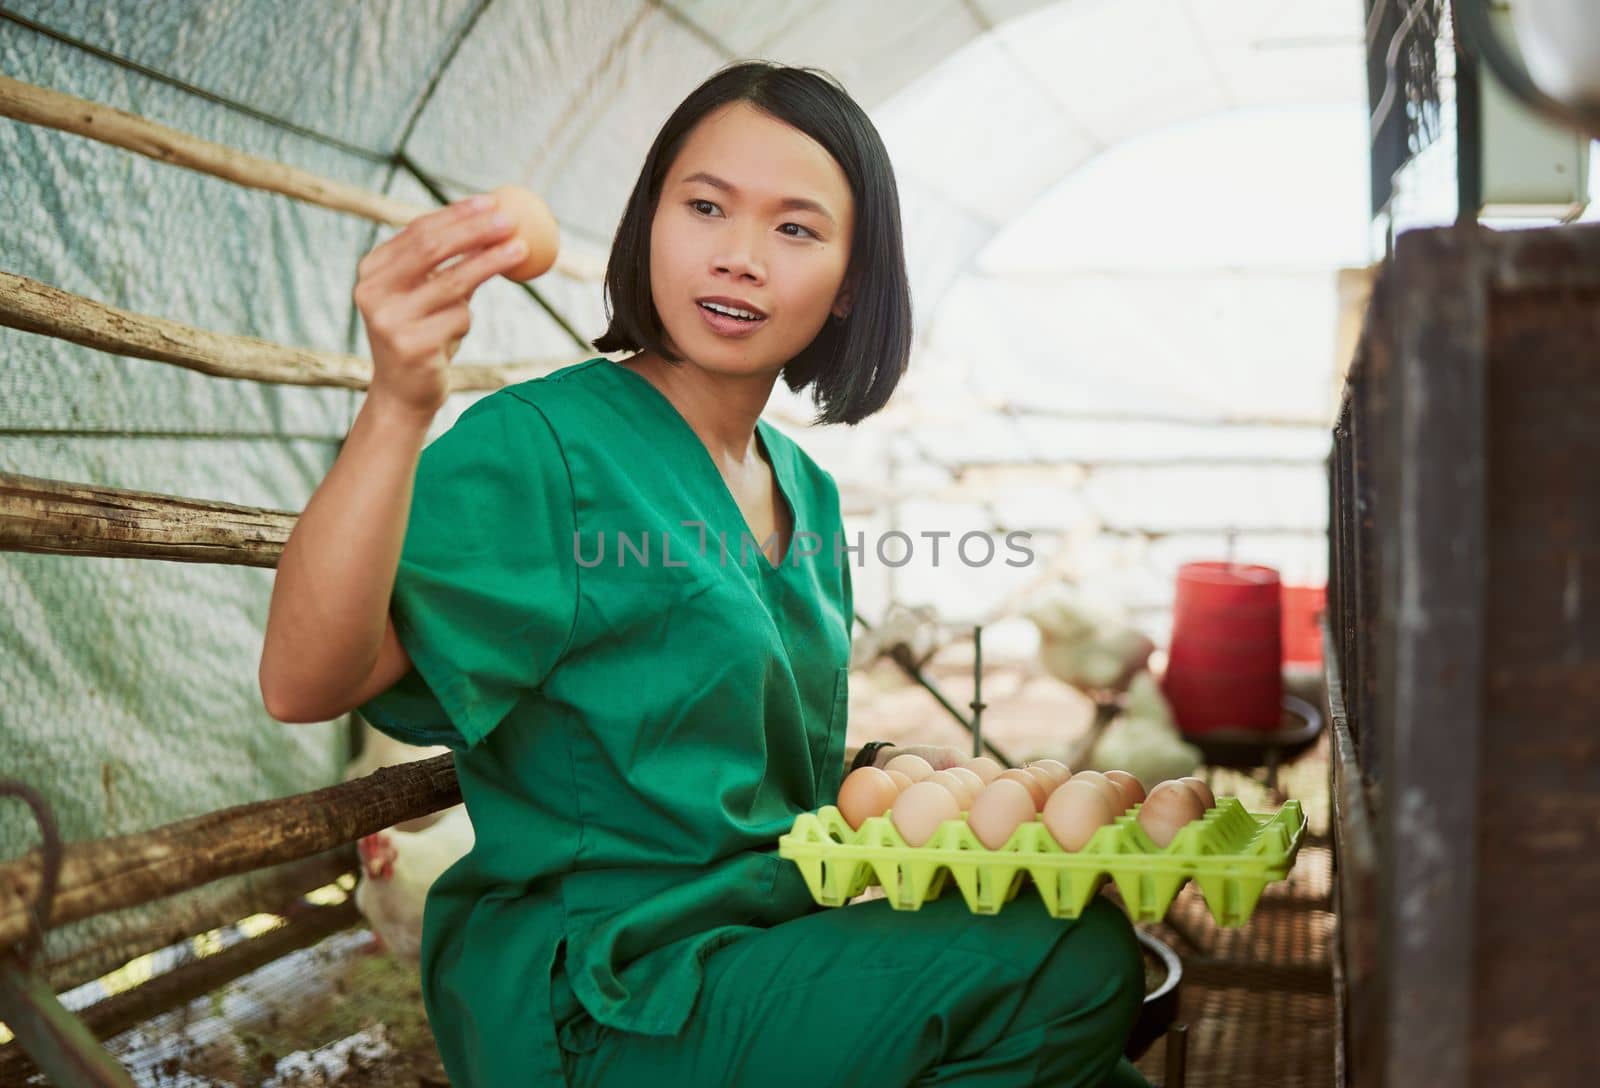 Eggs, sustainability and a chicken farm vet woman doing inspection for quality control, health and wellness of poultry animal. Asian farmer holding protein food for sustainable farming of animals.